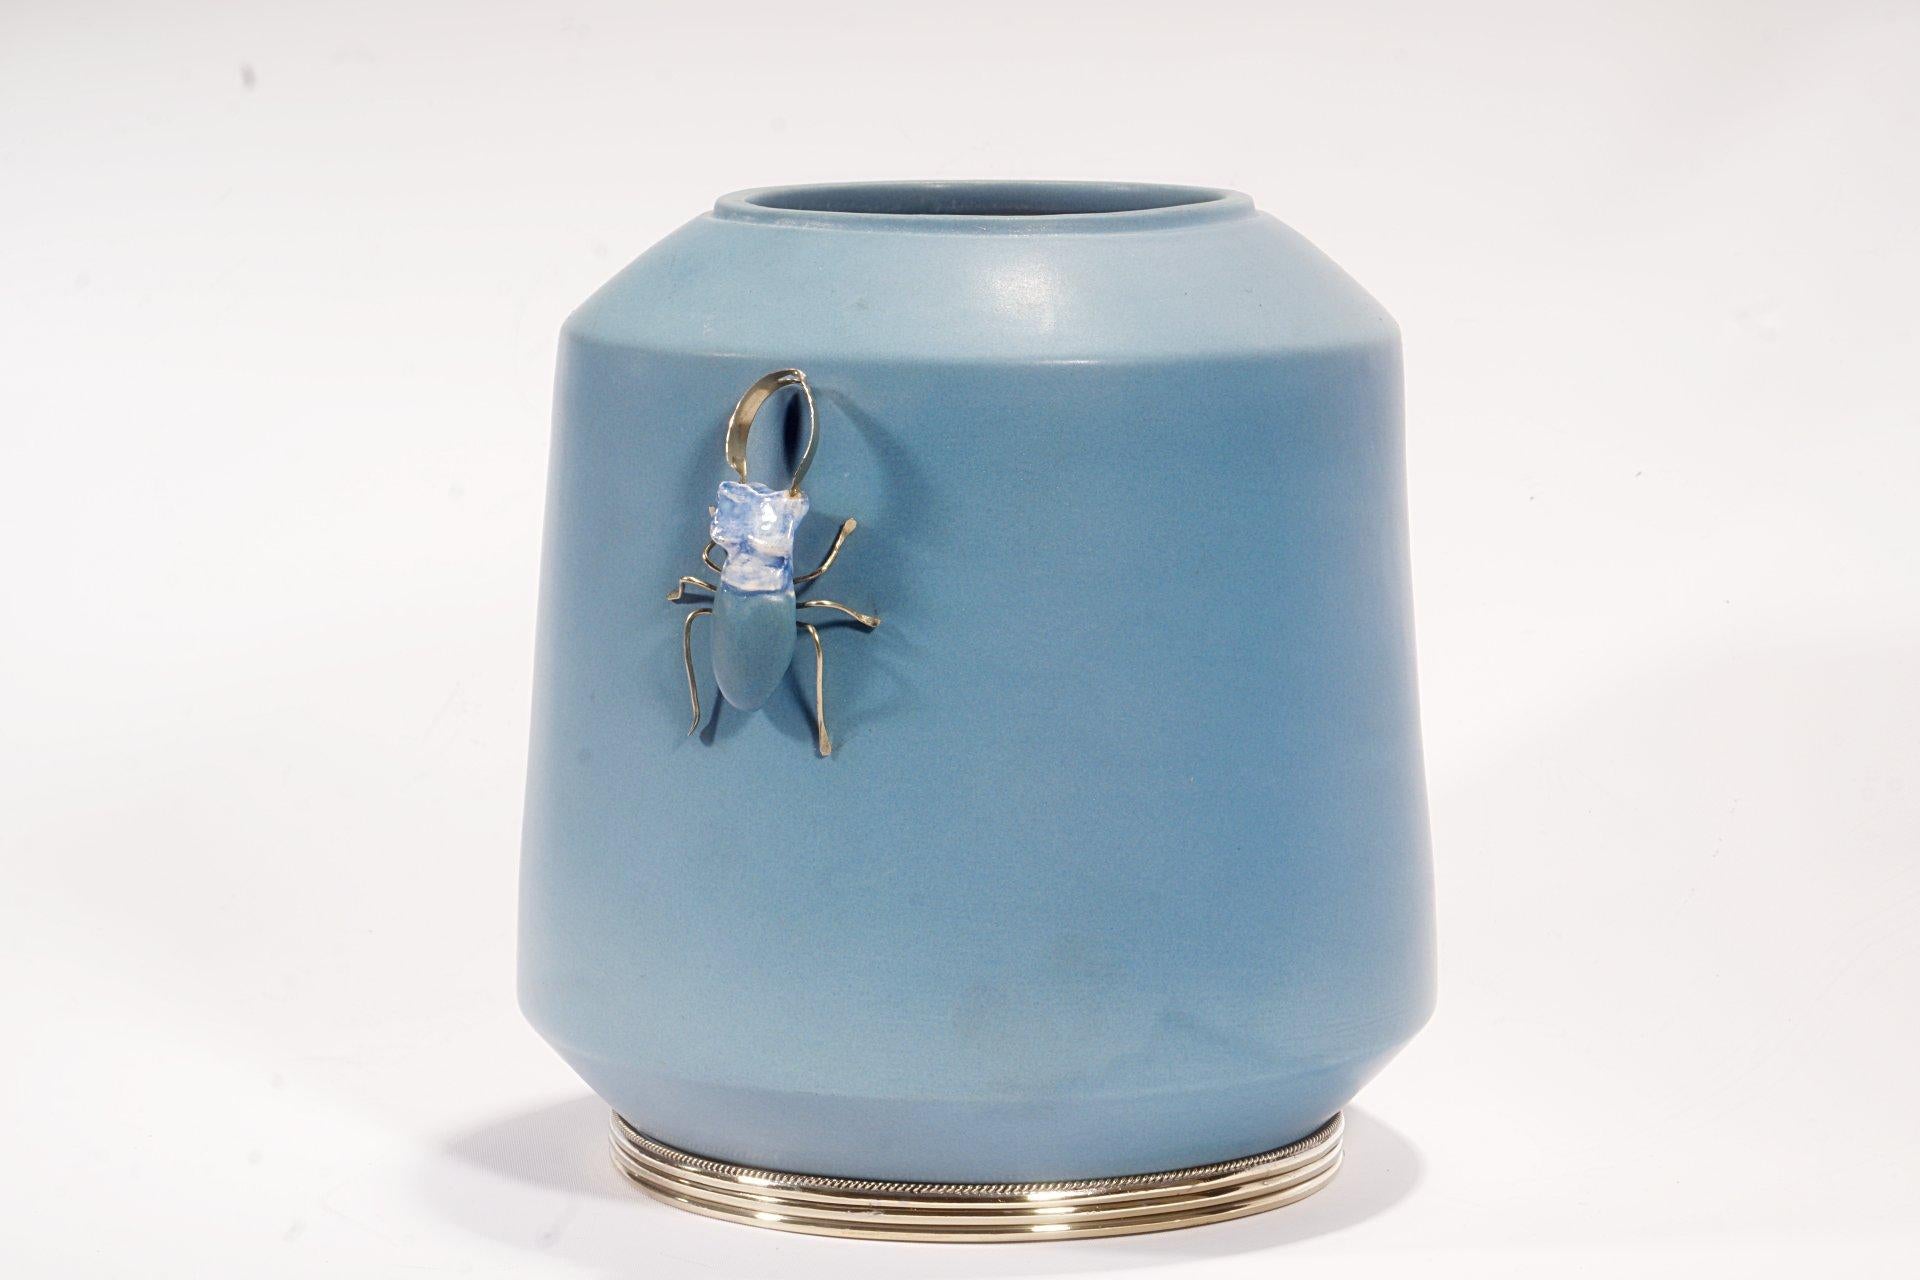 Mexican Beetle Jar by Estudio Guerrero, Glazed Ceramic and White Metal